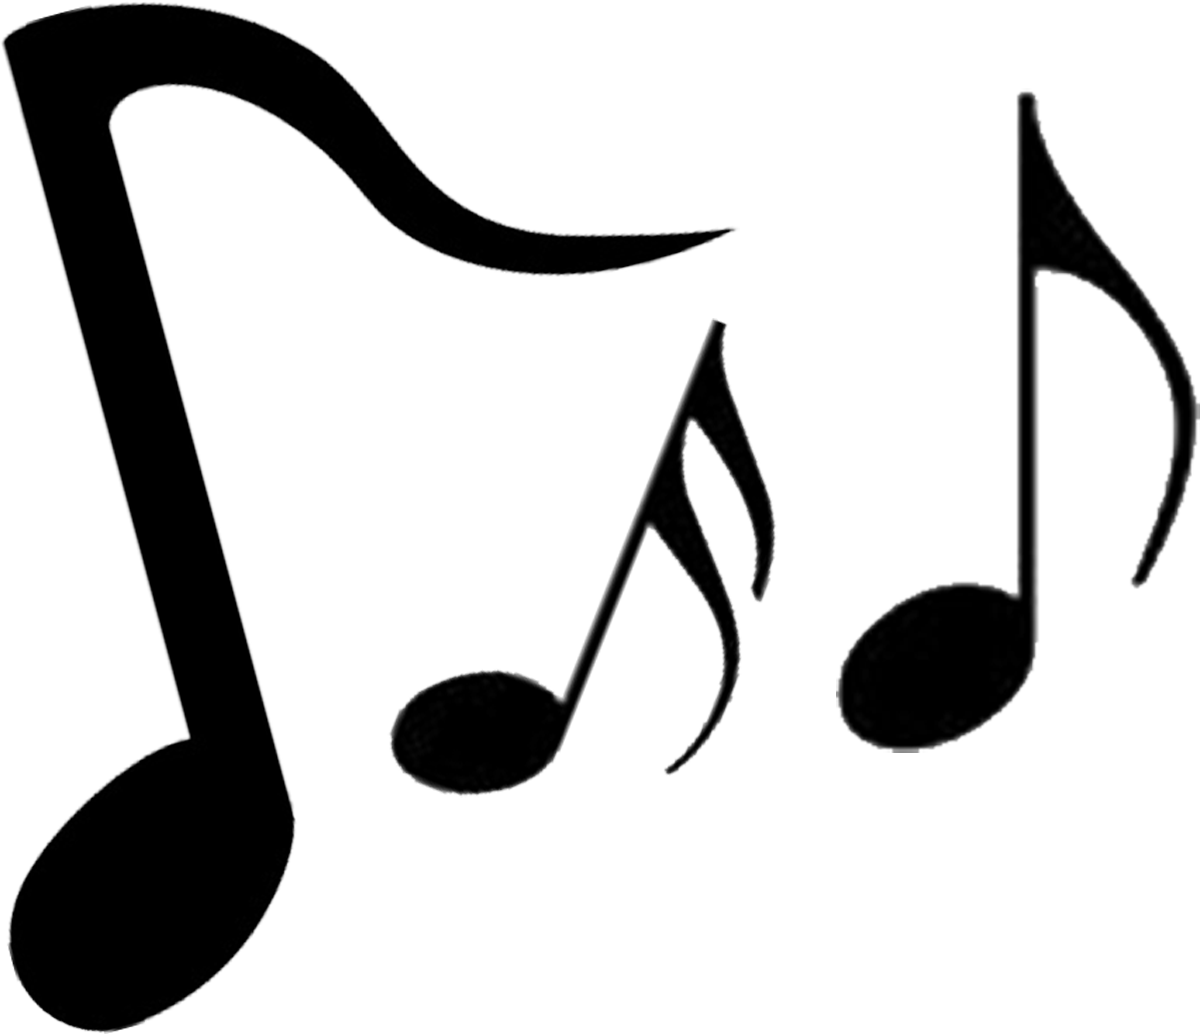 Clipart music musical performance. Pics for band instruments